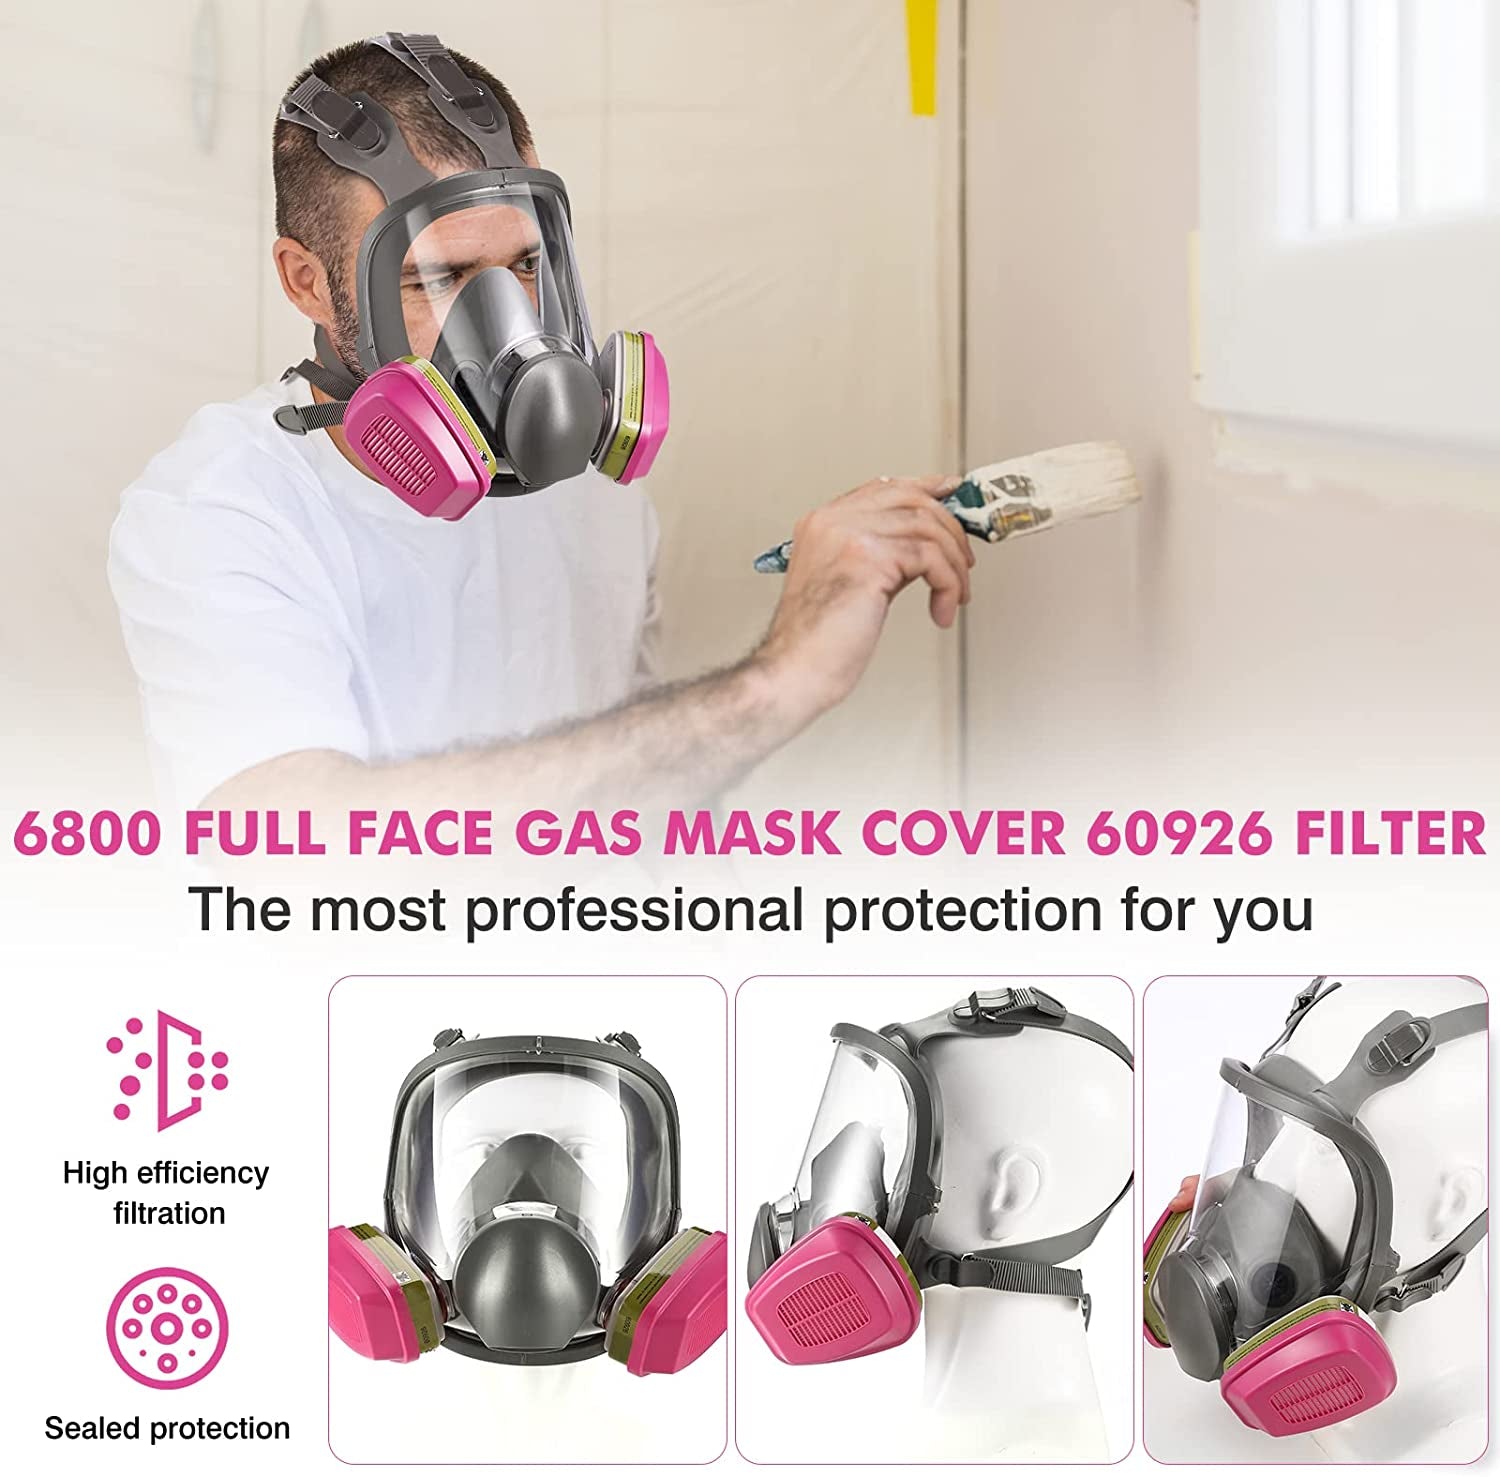 Full-Face Mask Respirator with 60926 Cartridges - Anti-Fog,Reusable Gas Cover Organic Vapor Masks Survival Nuclear,Paint Mask for Painting,Dust,Formaldehyde,Epoxy Resin,Sanding,Cutting,Welding